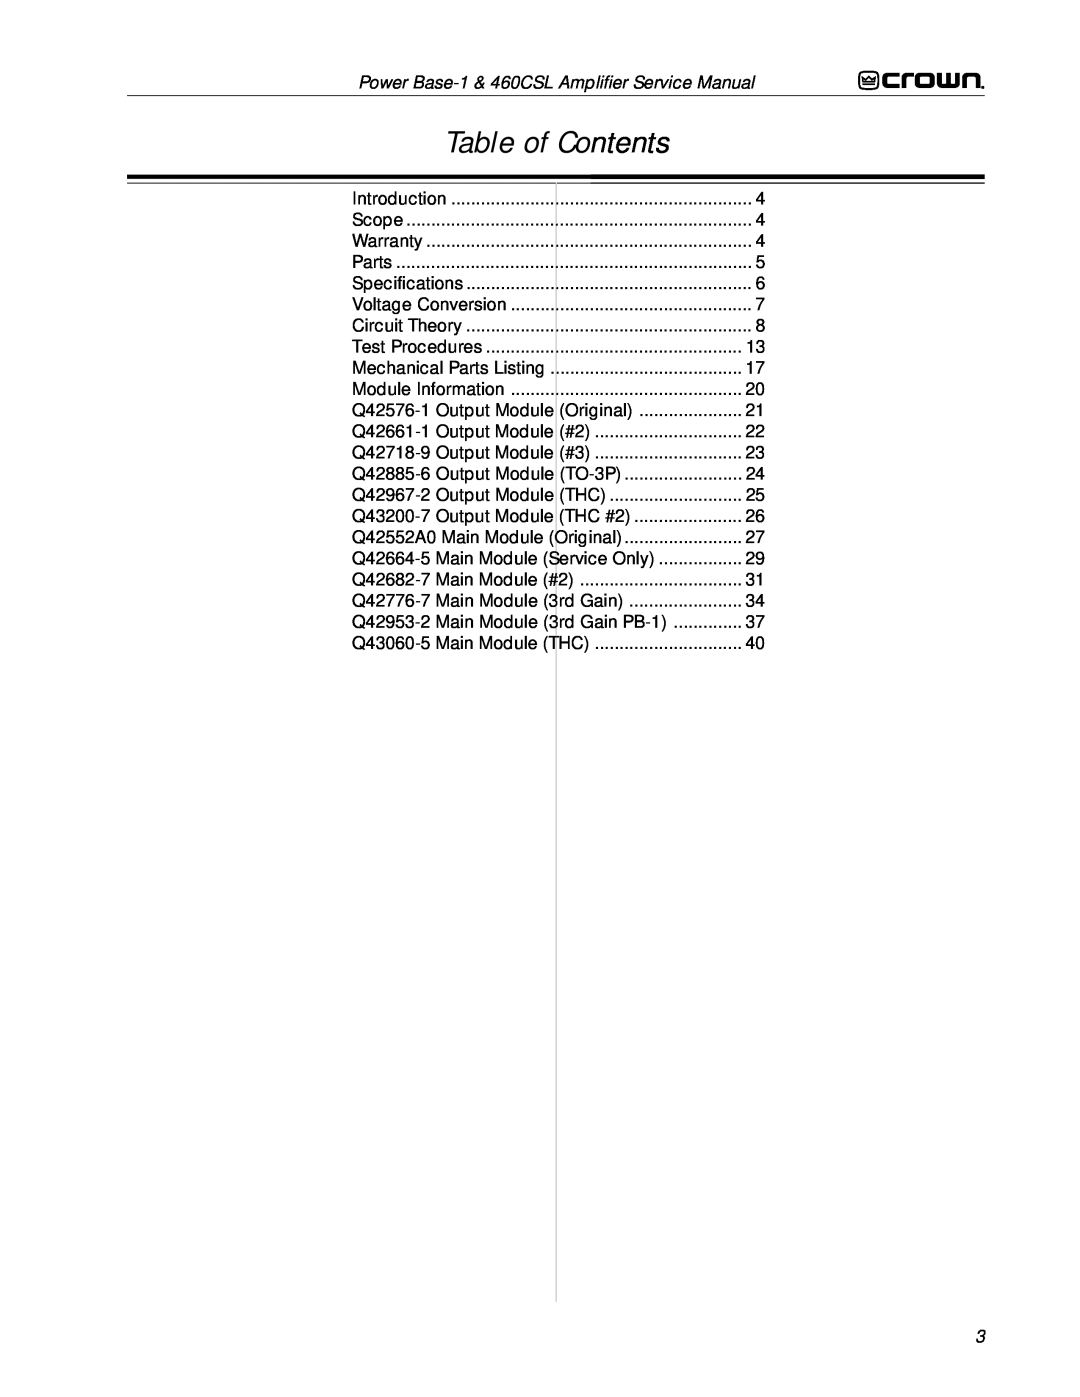 Crown 460CSL service manual Table of Contents 